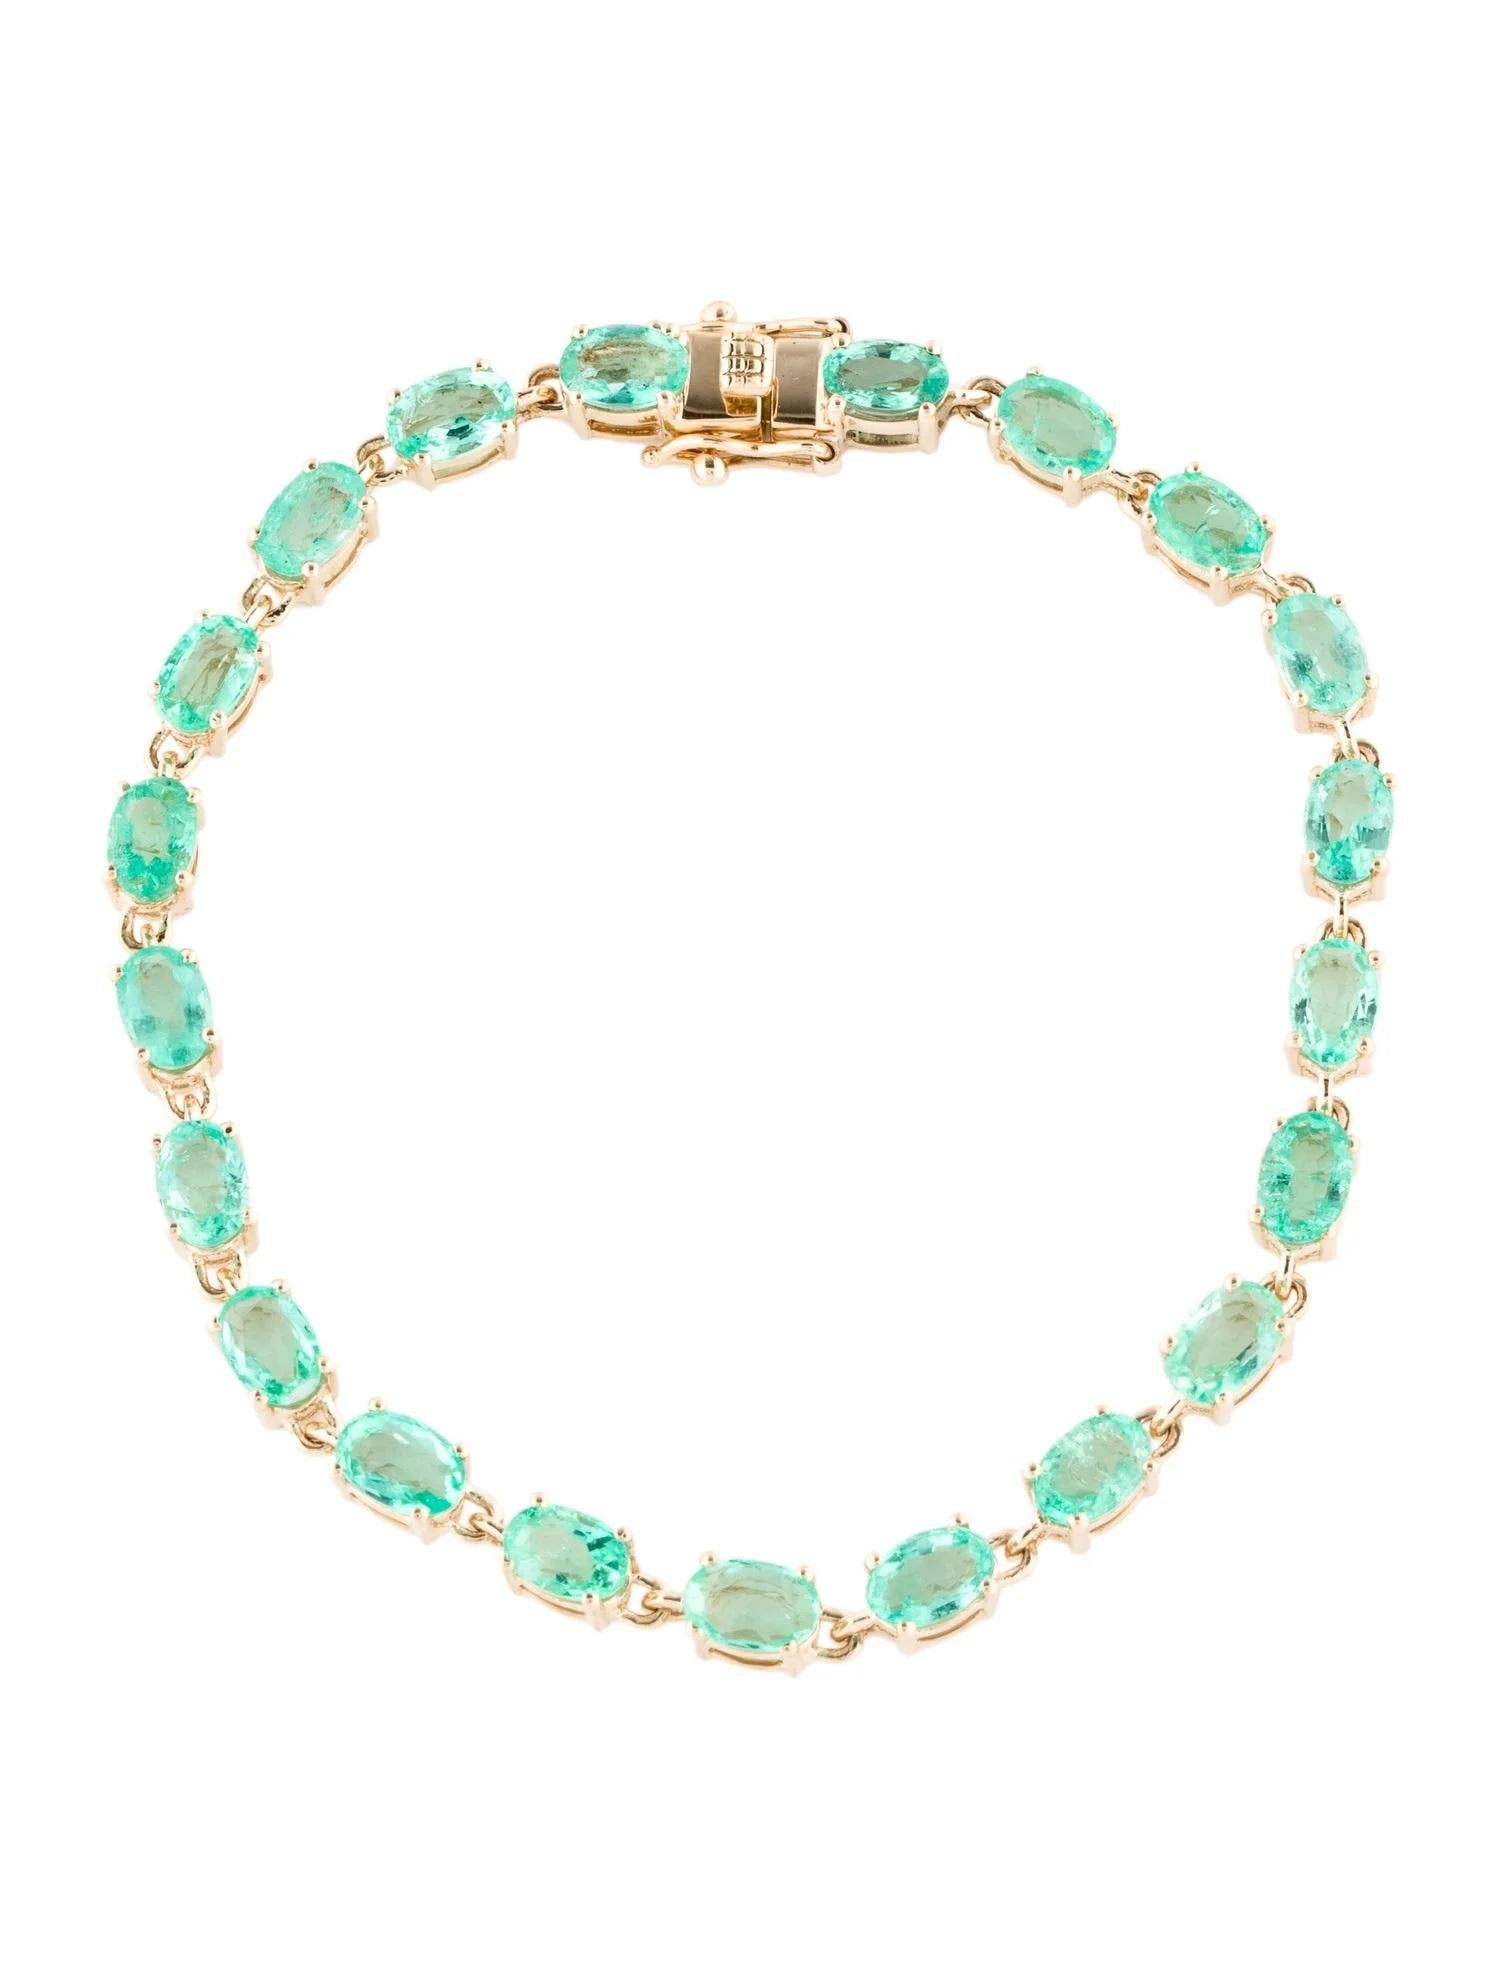 Oval Cut 14K 9.62ctw Emerald Link Bracelet - Luxurious Faceted Oval Stones For Sale